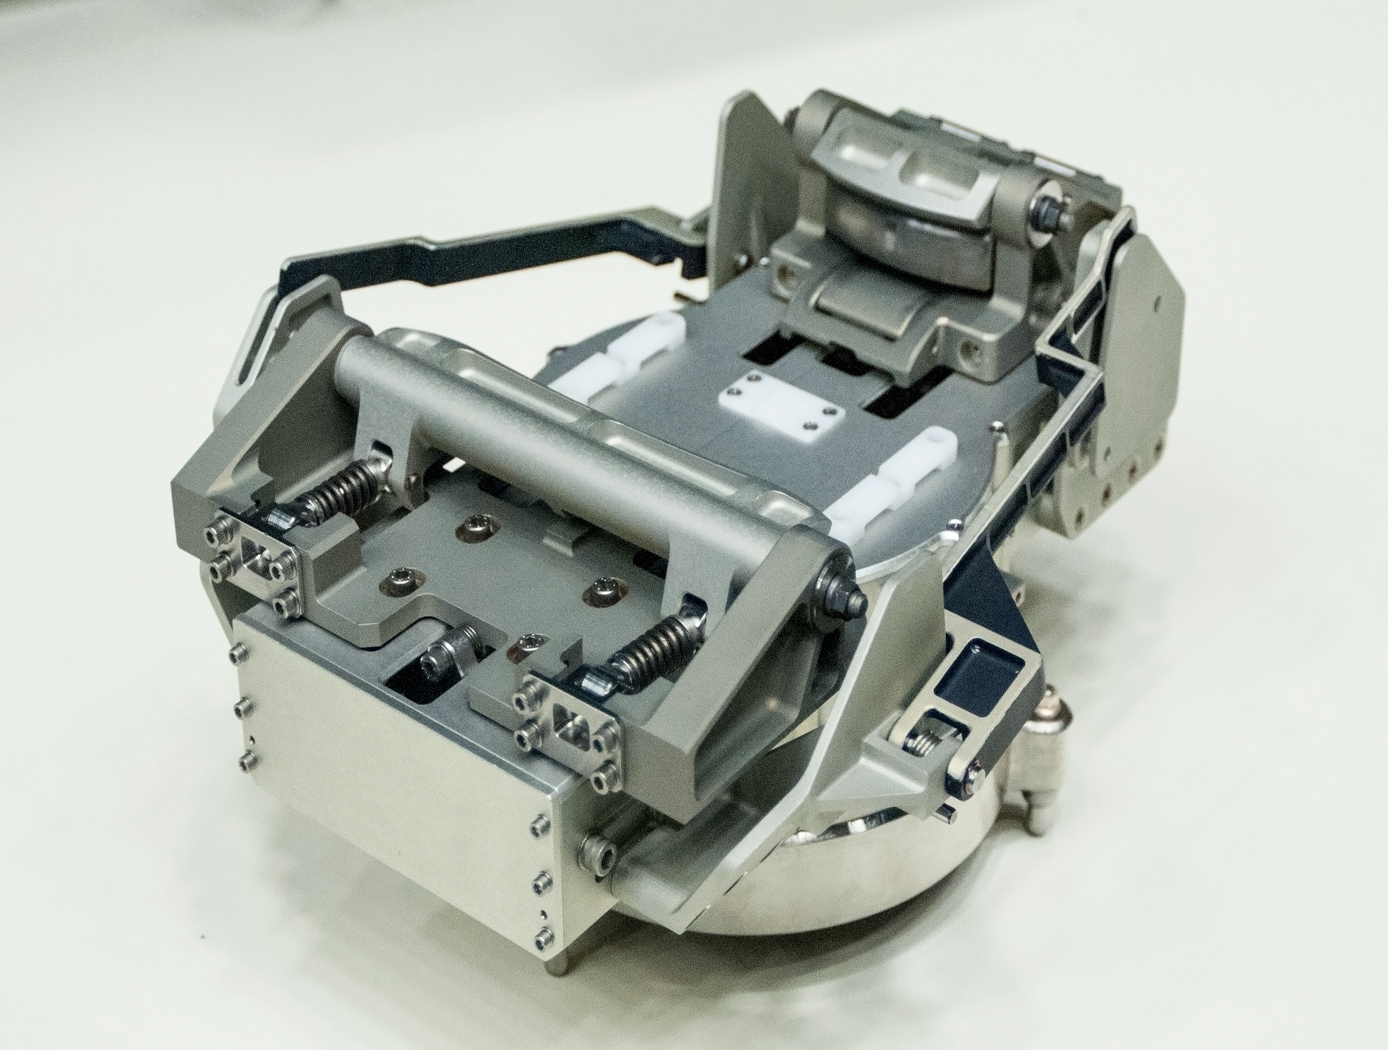 Robotic gripper for satellite capture and servicing